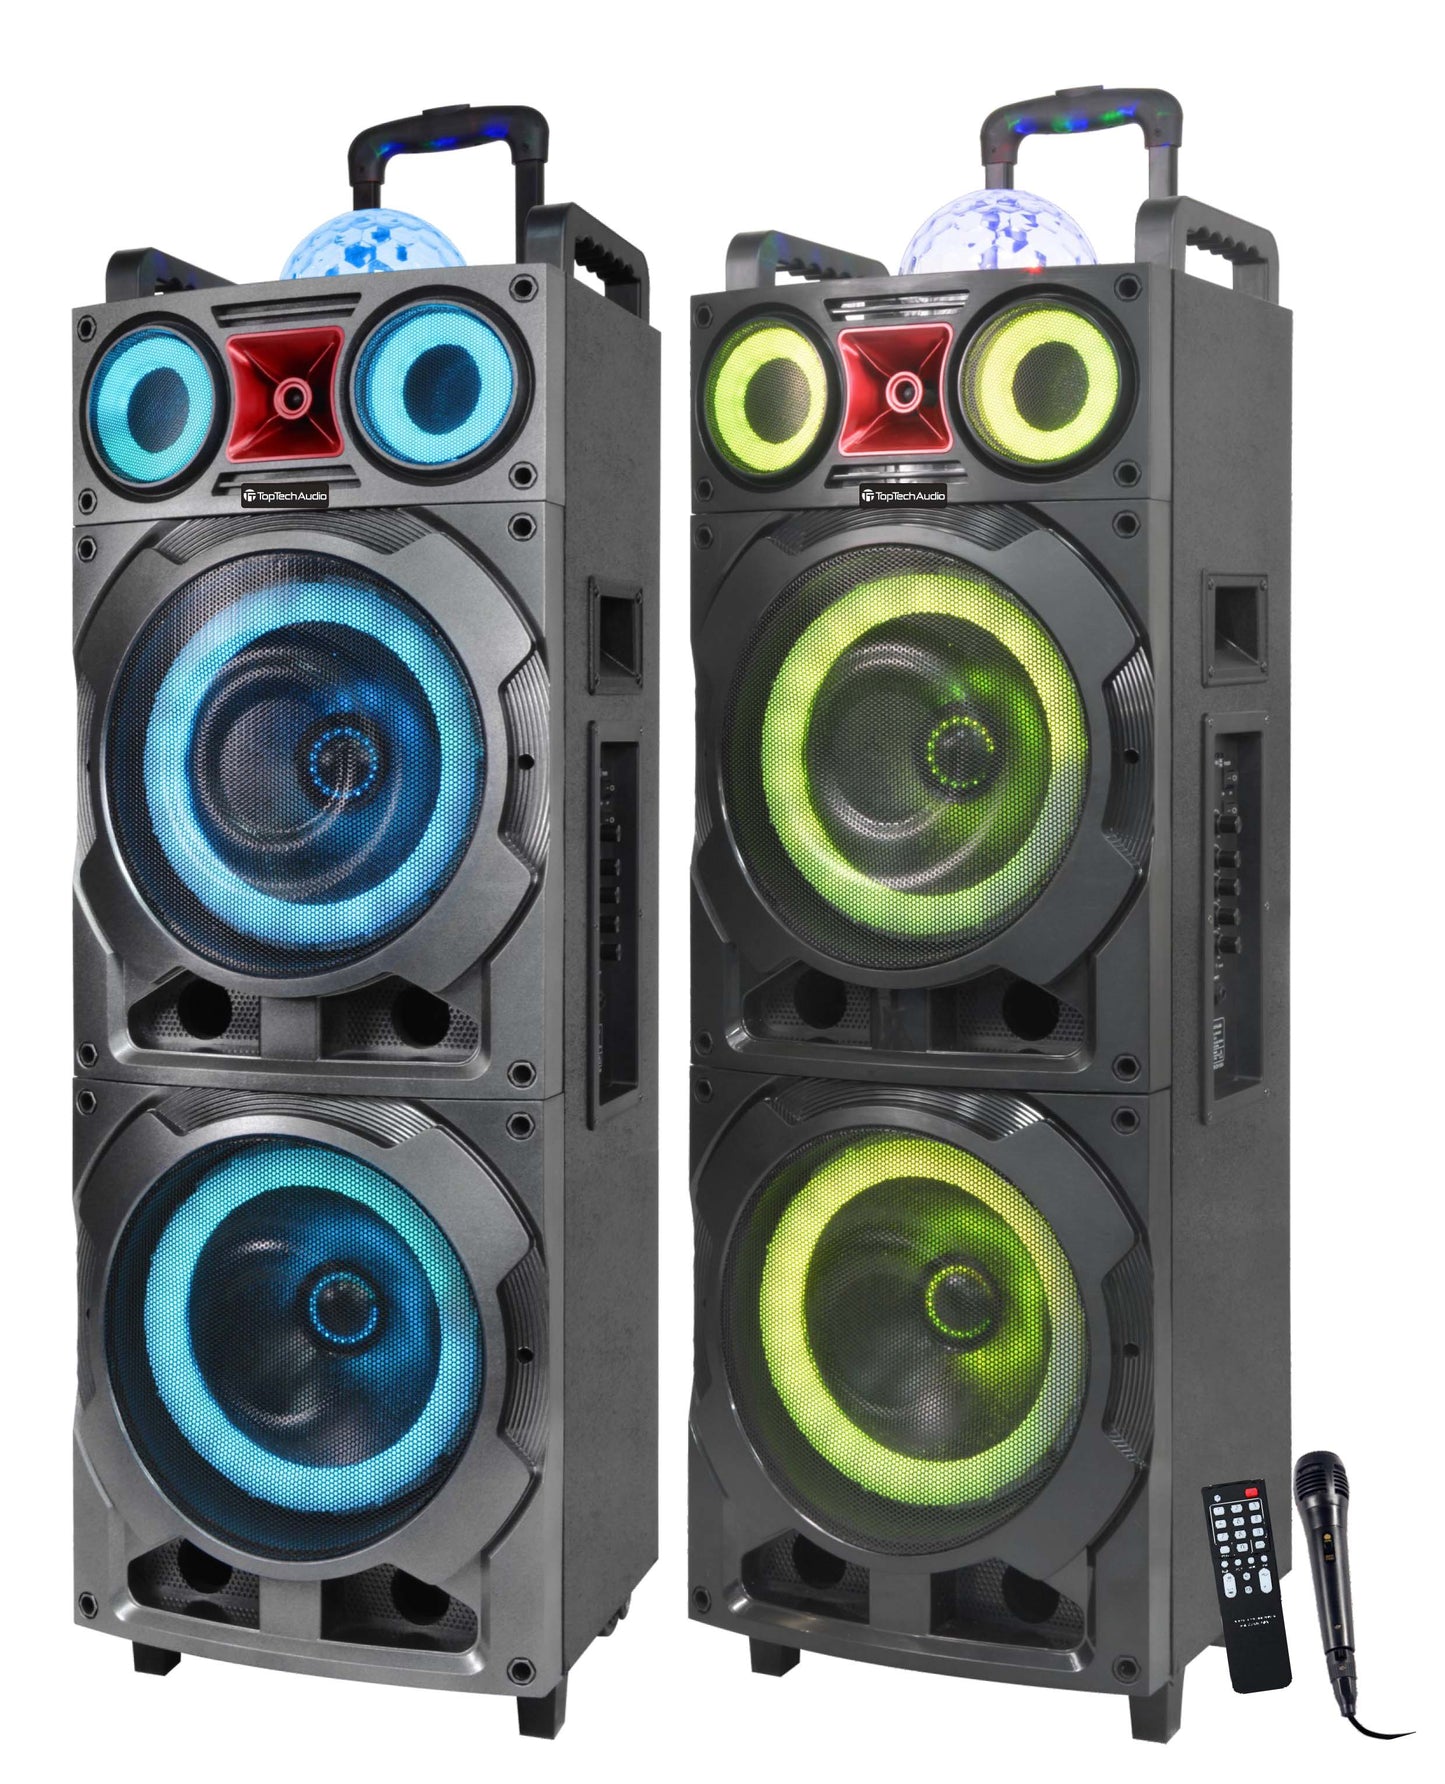 Fully Amplified Portable 10000 Watts Peak Power 2x12” Speaker with led light